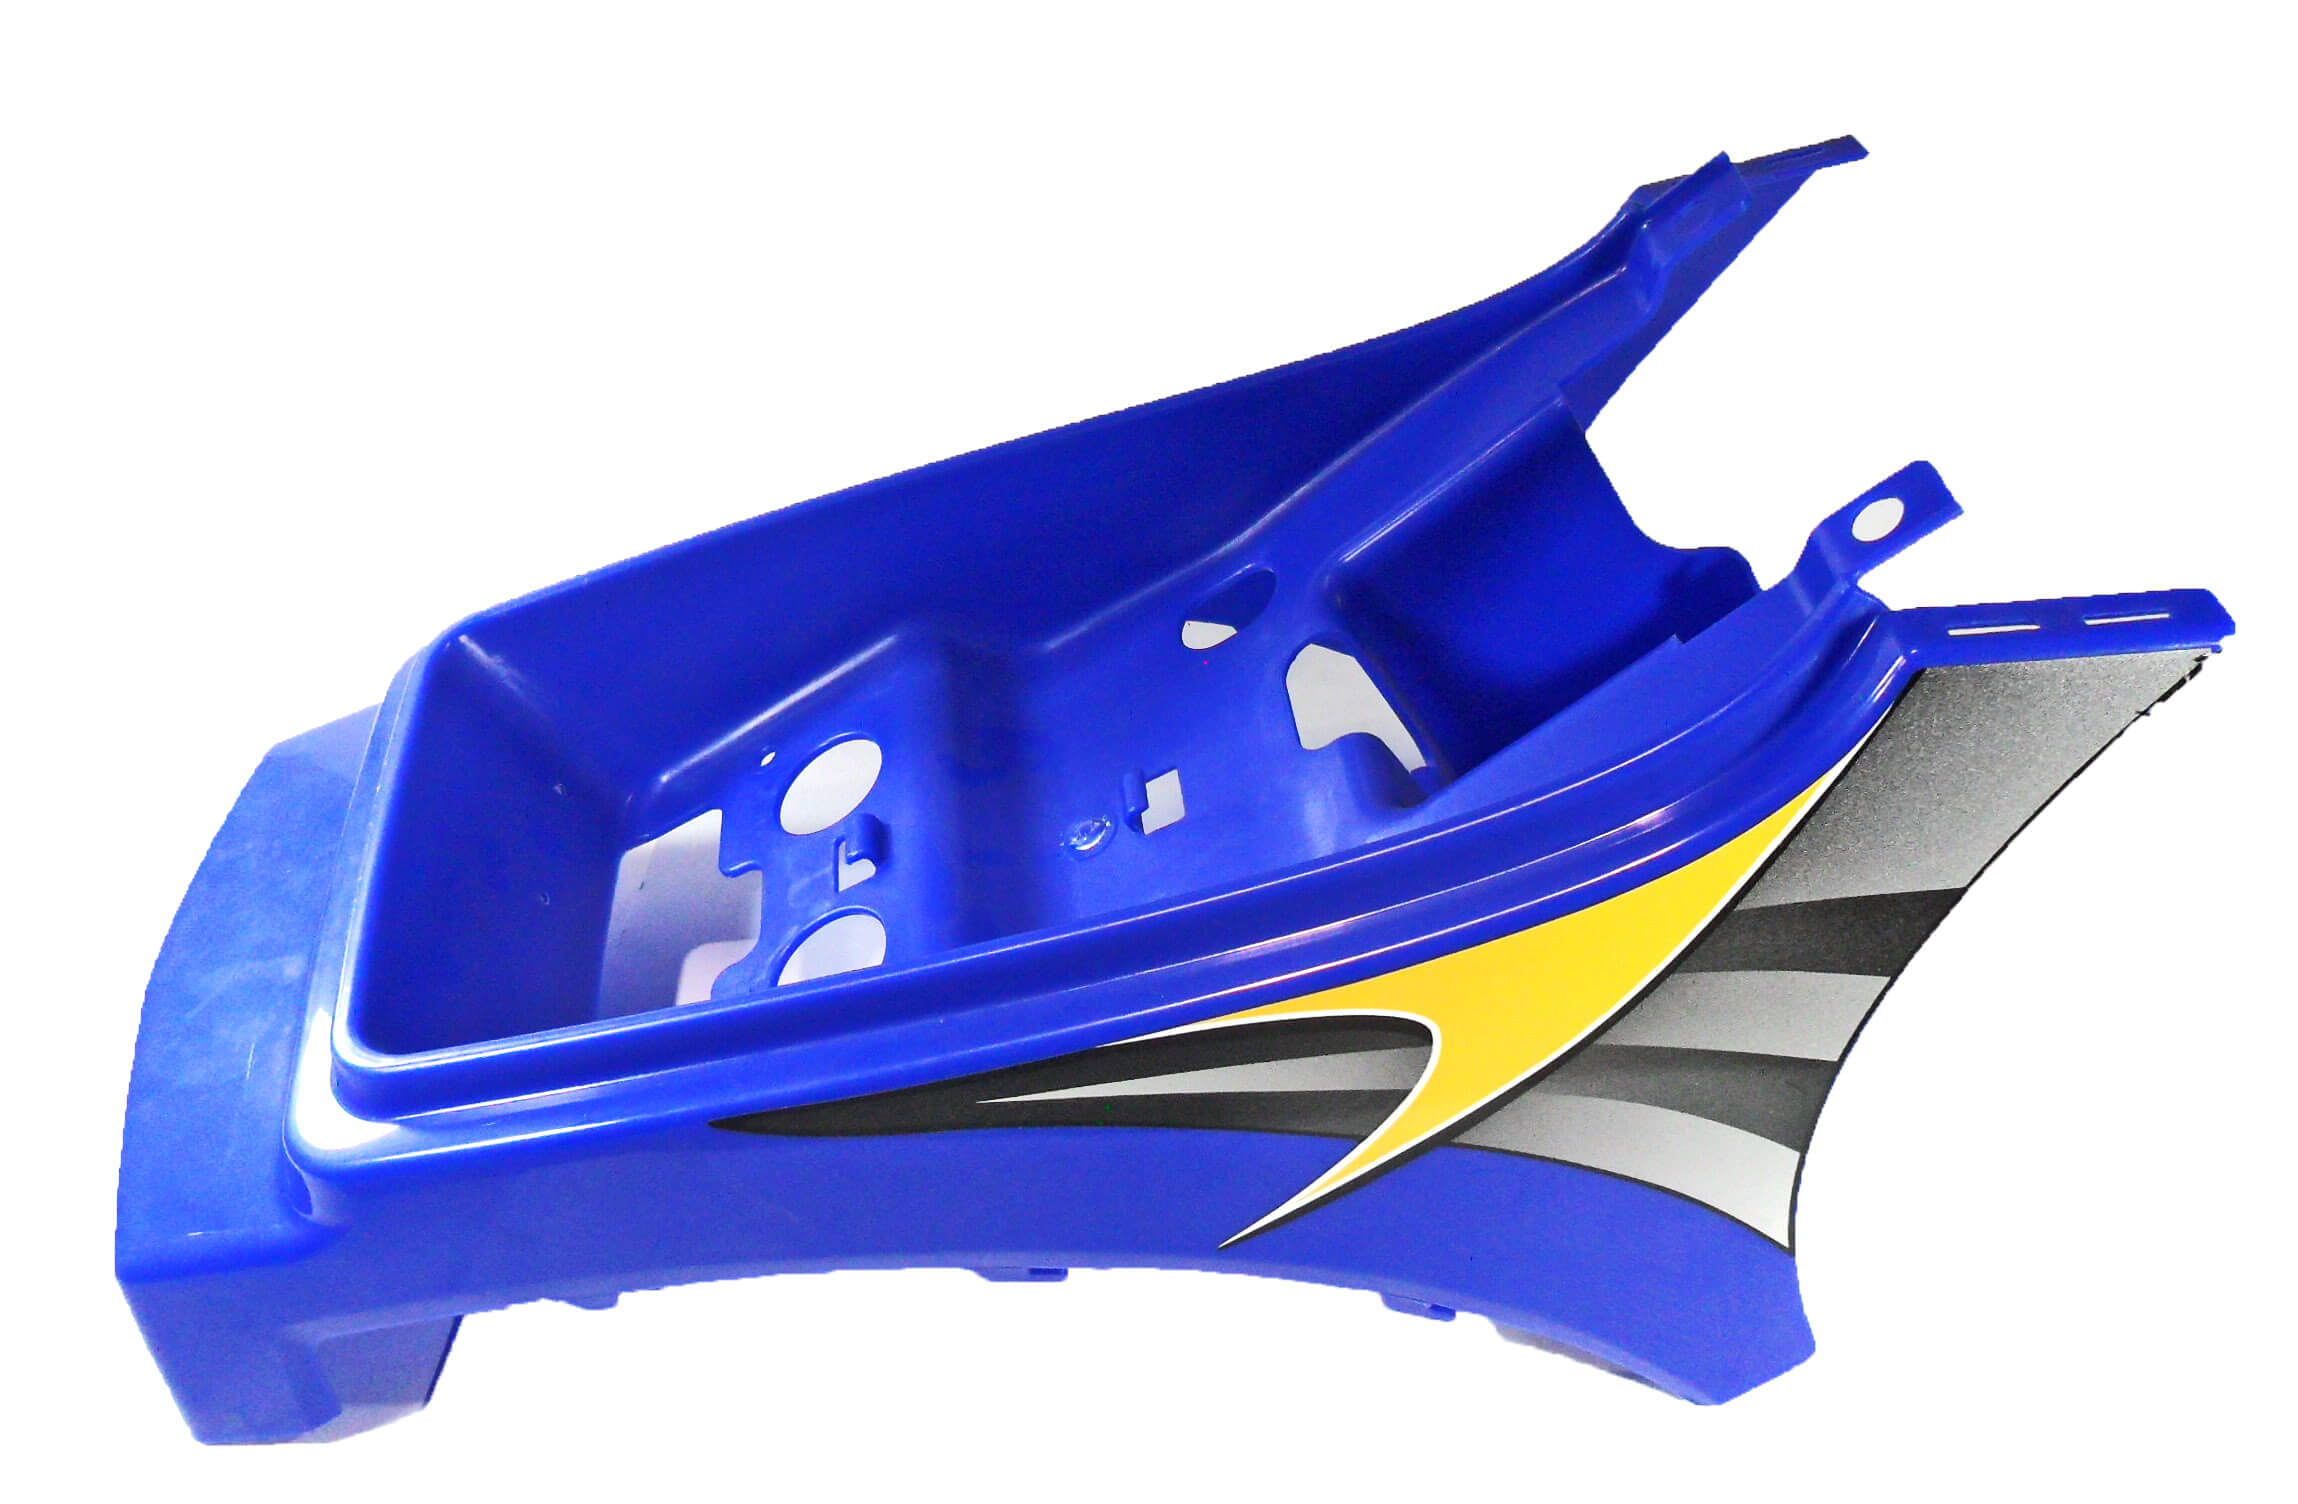 Rear Body Cover (Blue) Fits E-Ton Viper RXL 50, 70, 90cc ATVs Note: Front Body Cover (Blue) Fits E-Ton Viper RXL 50, 70, 90cc ATVs Note: This is a new body cover with minor blemishes due to packaging. - Click Image to Close